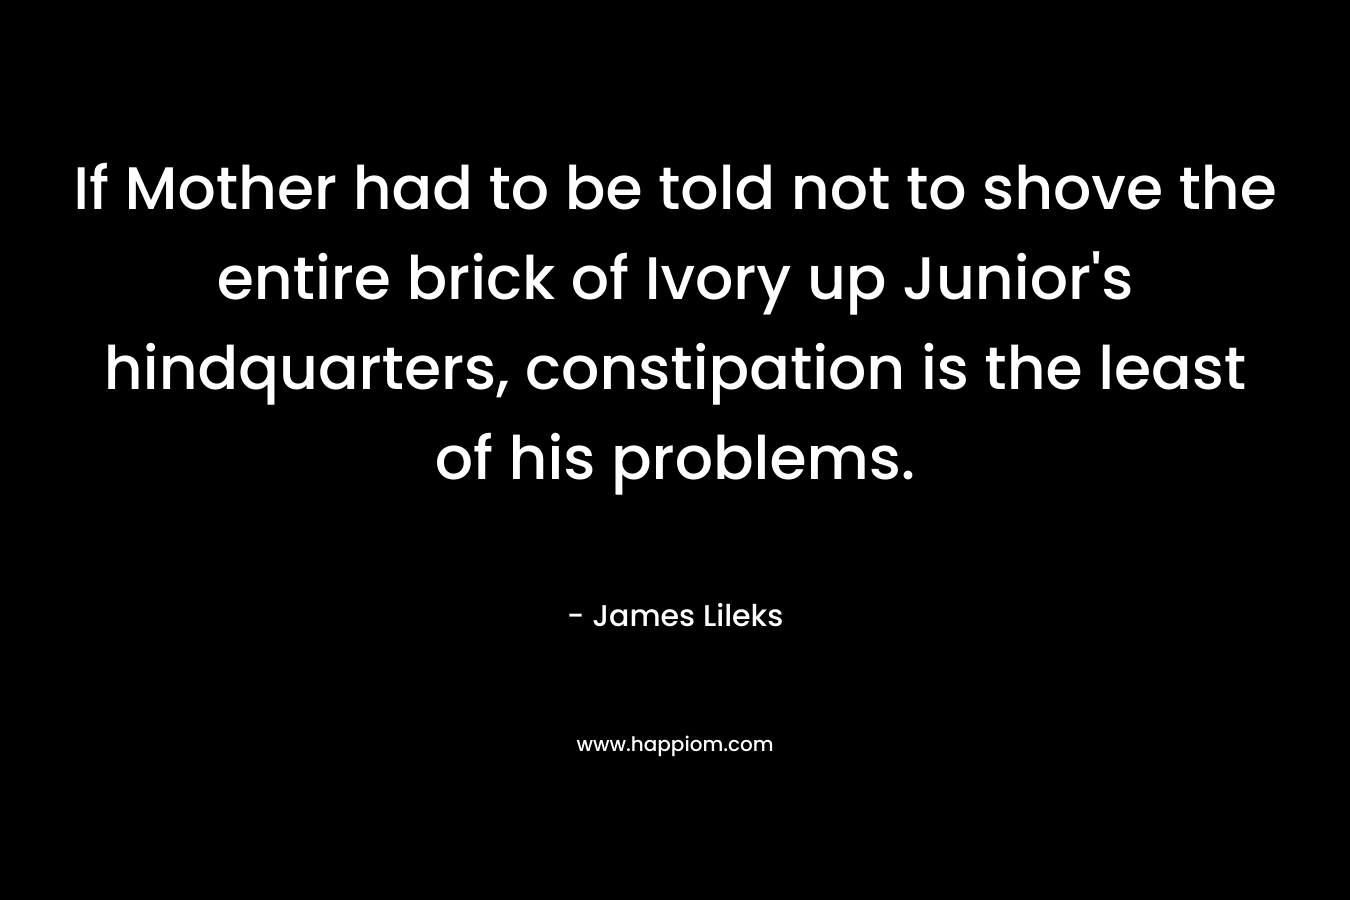 If Mother had to be told not to shove the entire brick of Ivory up Junior’s hindquarters, constipation is the least of his problems. – James Lileks